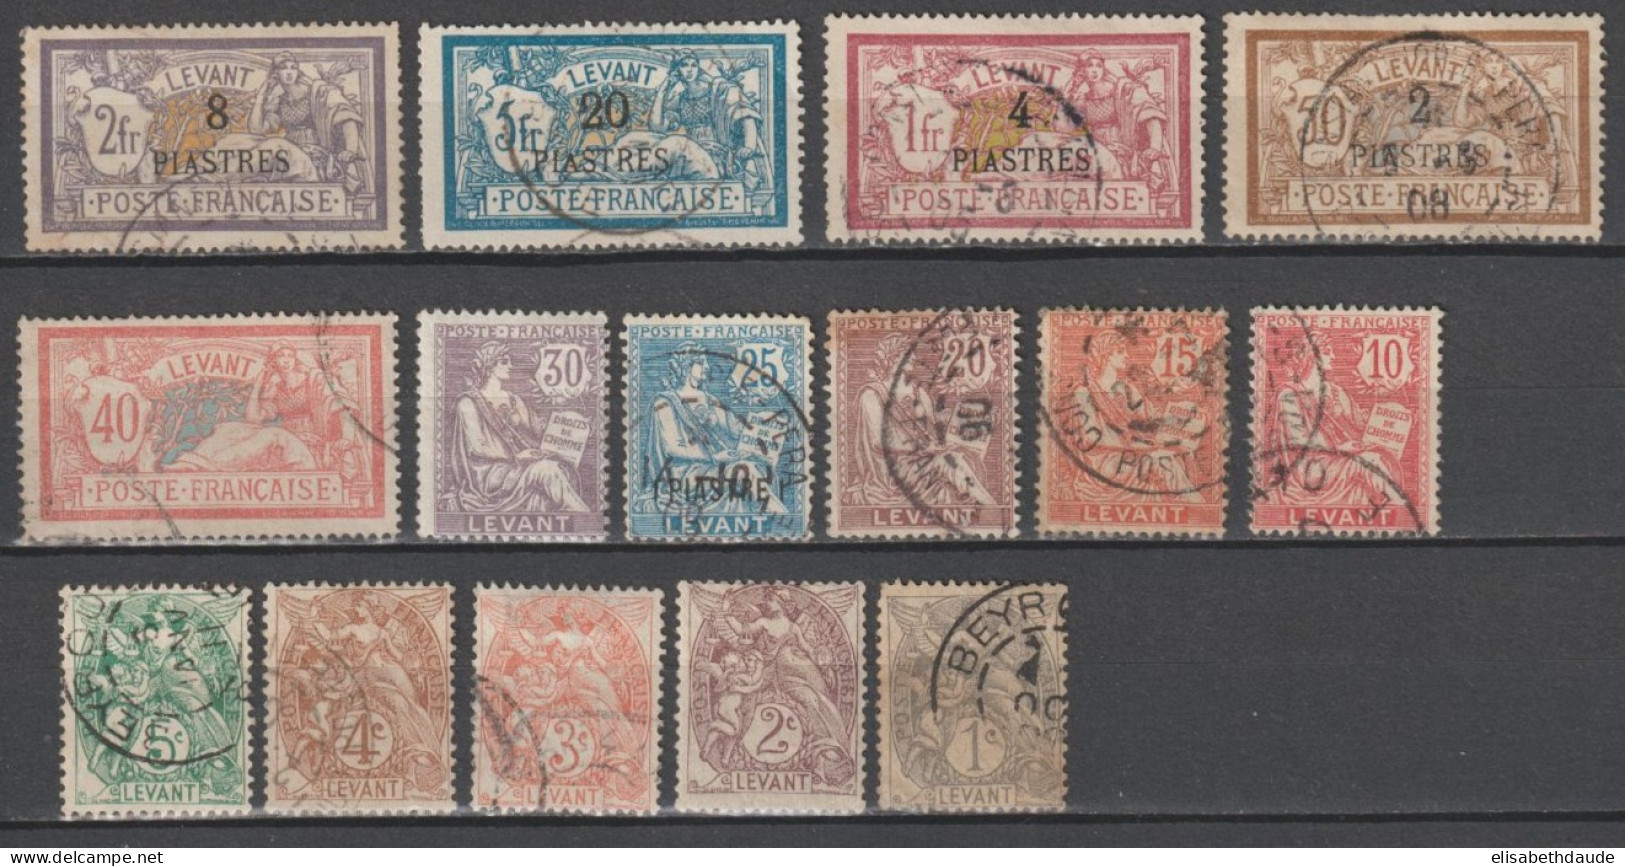 LEVANT - 1902 - SERIE COMPLETE YVERT 9/23 OBLITERE (2 TIMBRES * MH) - COTE = 57 EUR - Usados